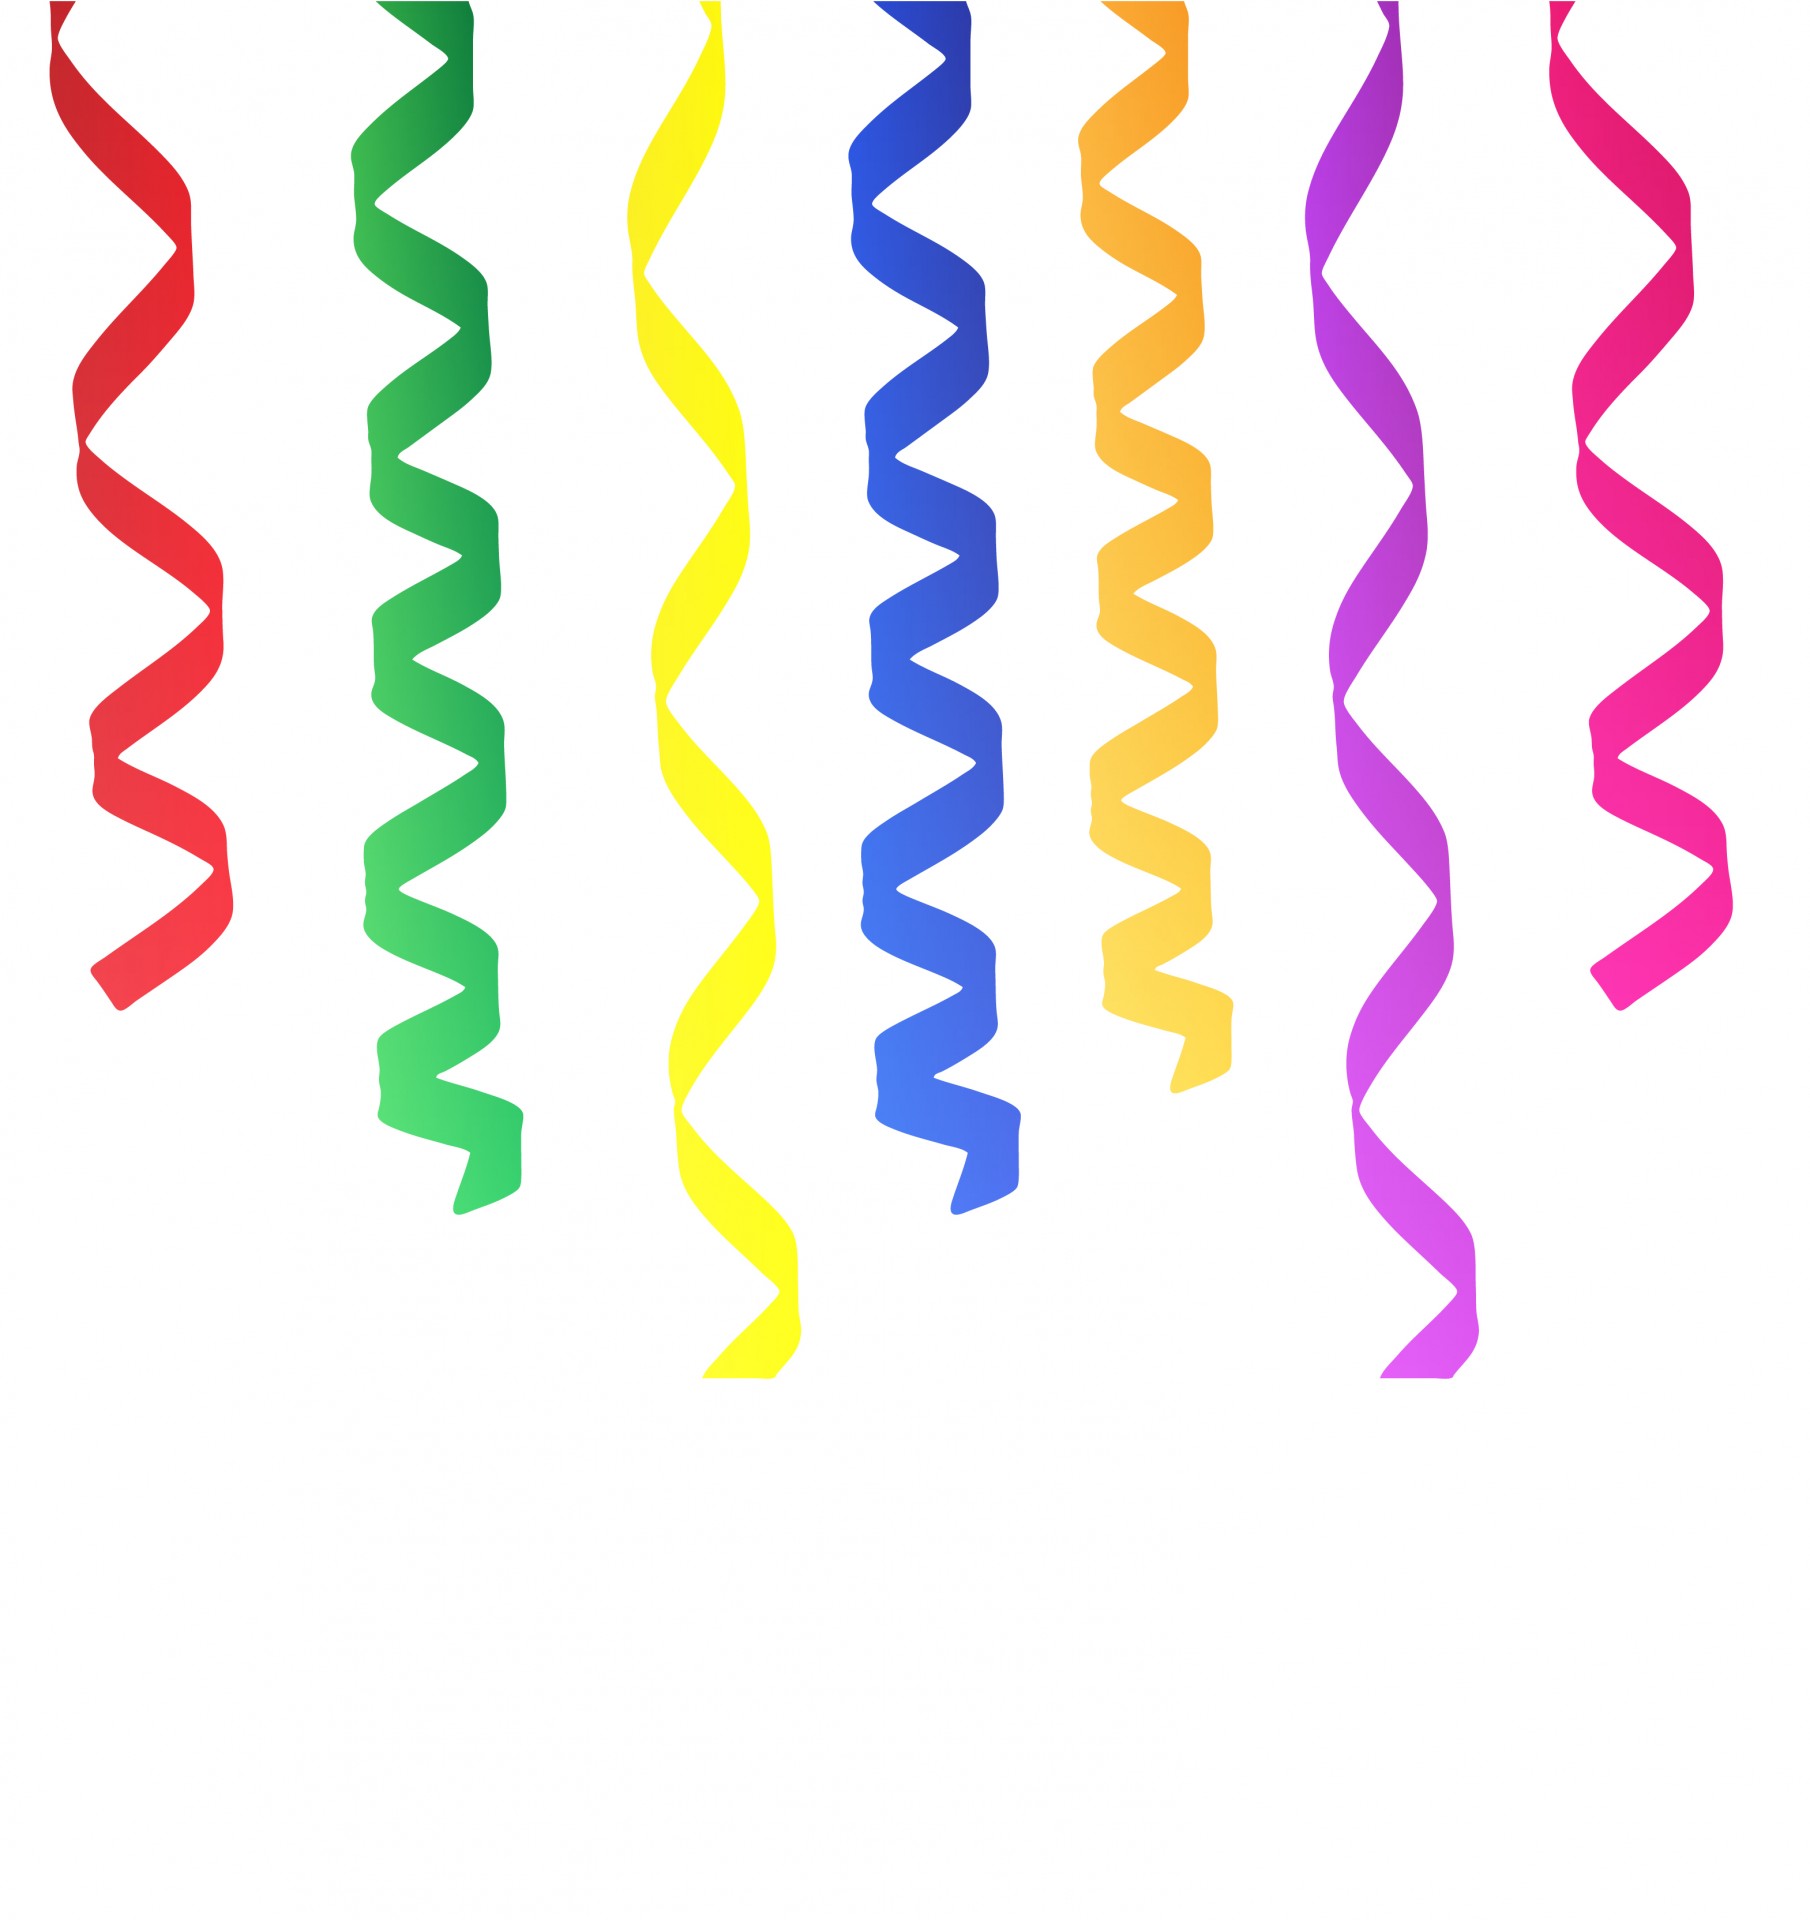 Streamers, Free Stock Photo, Illustration of hanging streamers